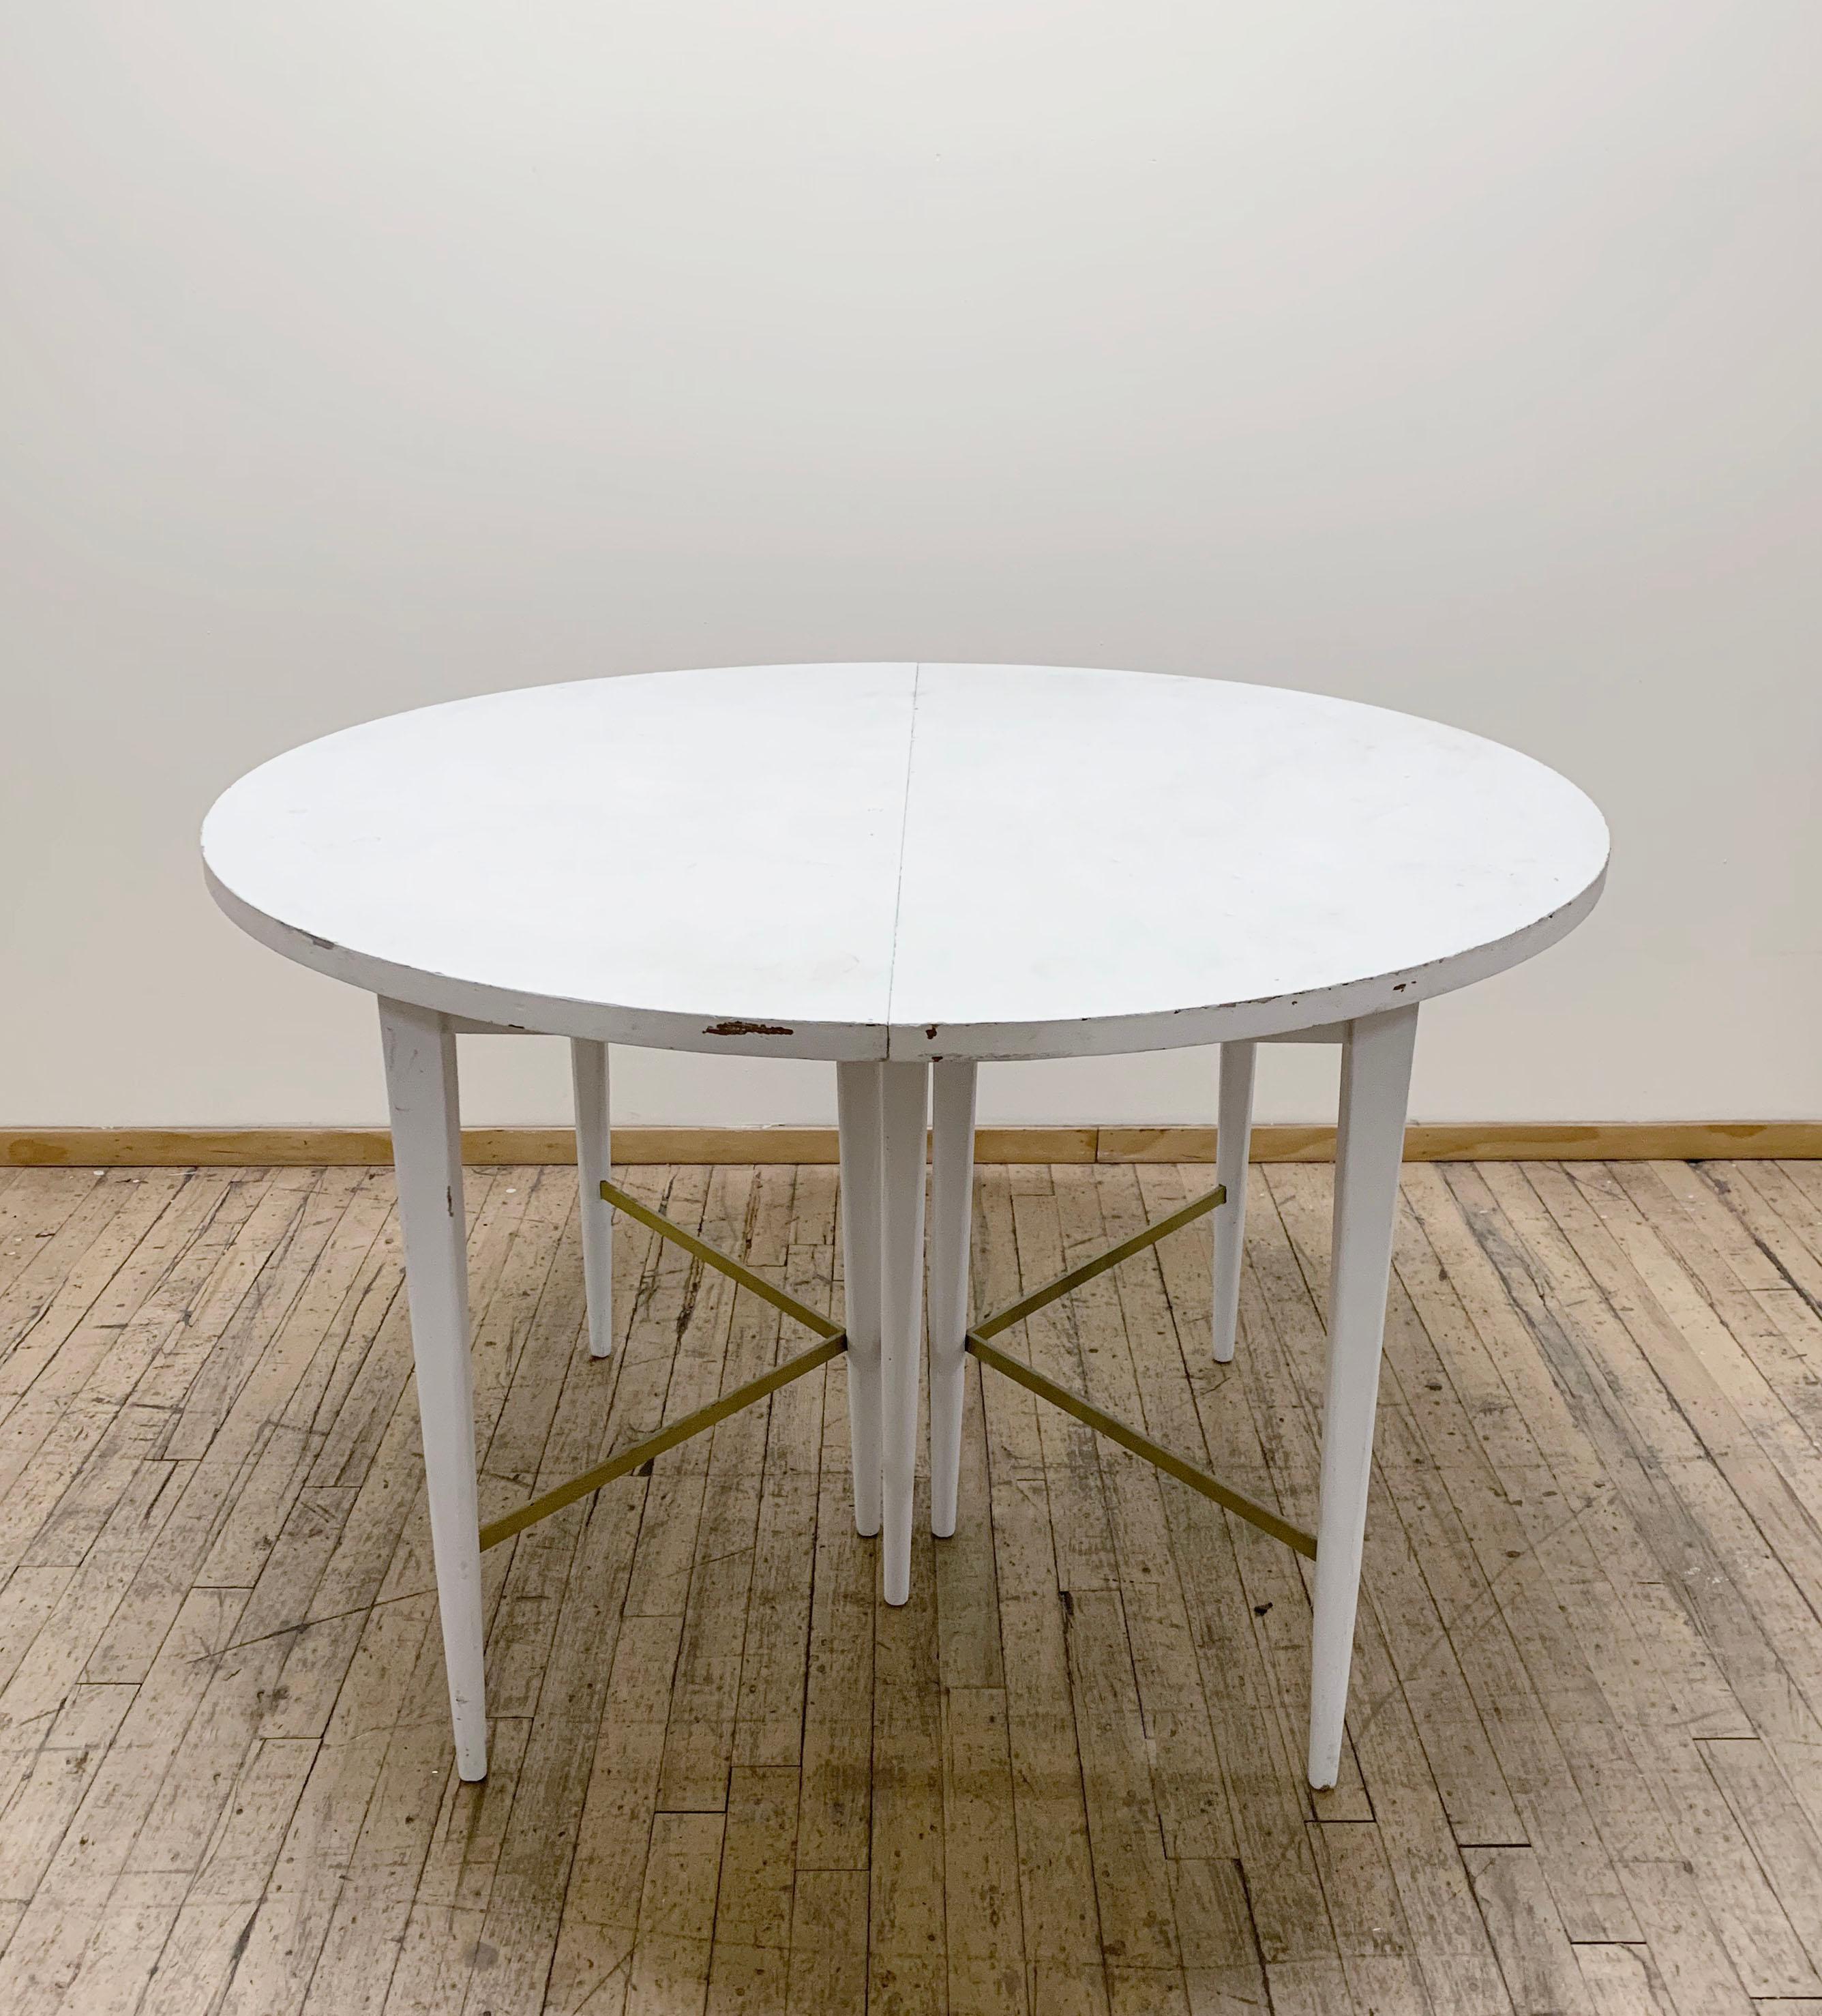 Paul McCobb Directional Dining Table with Brass Stretchers

One of the more desirable dining table forms with brass stretchers  by Paul Mccobb. Produced by Calvin as part of the 